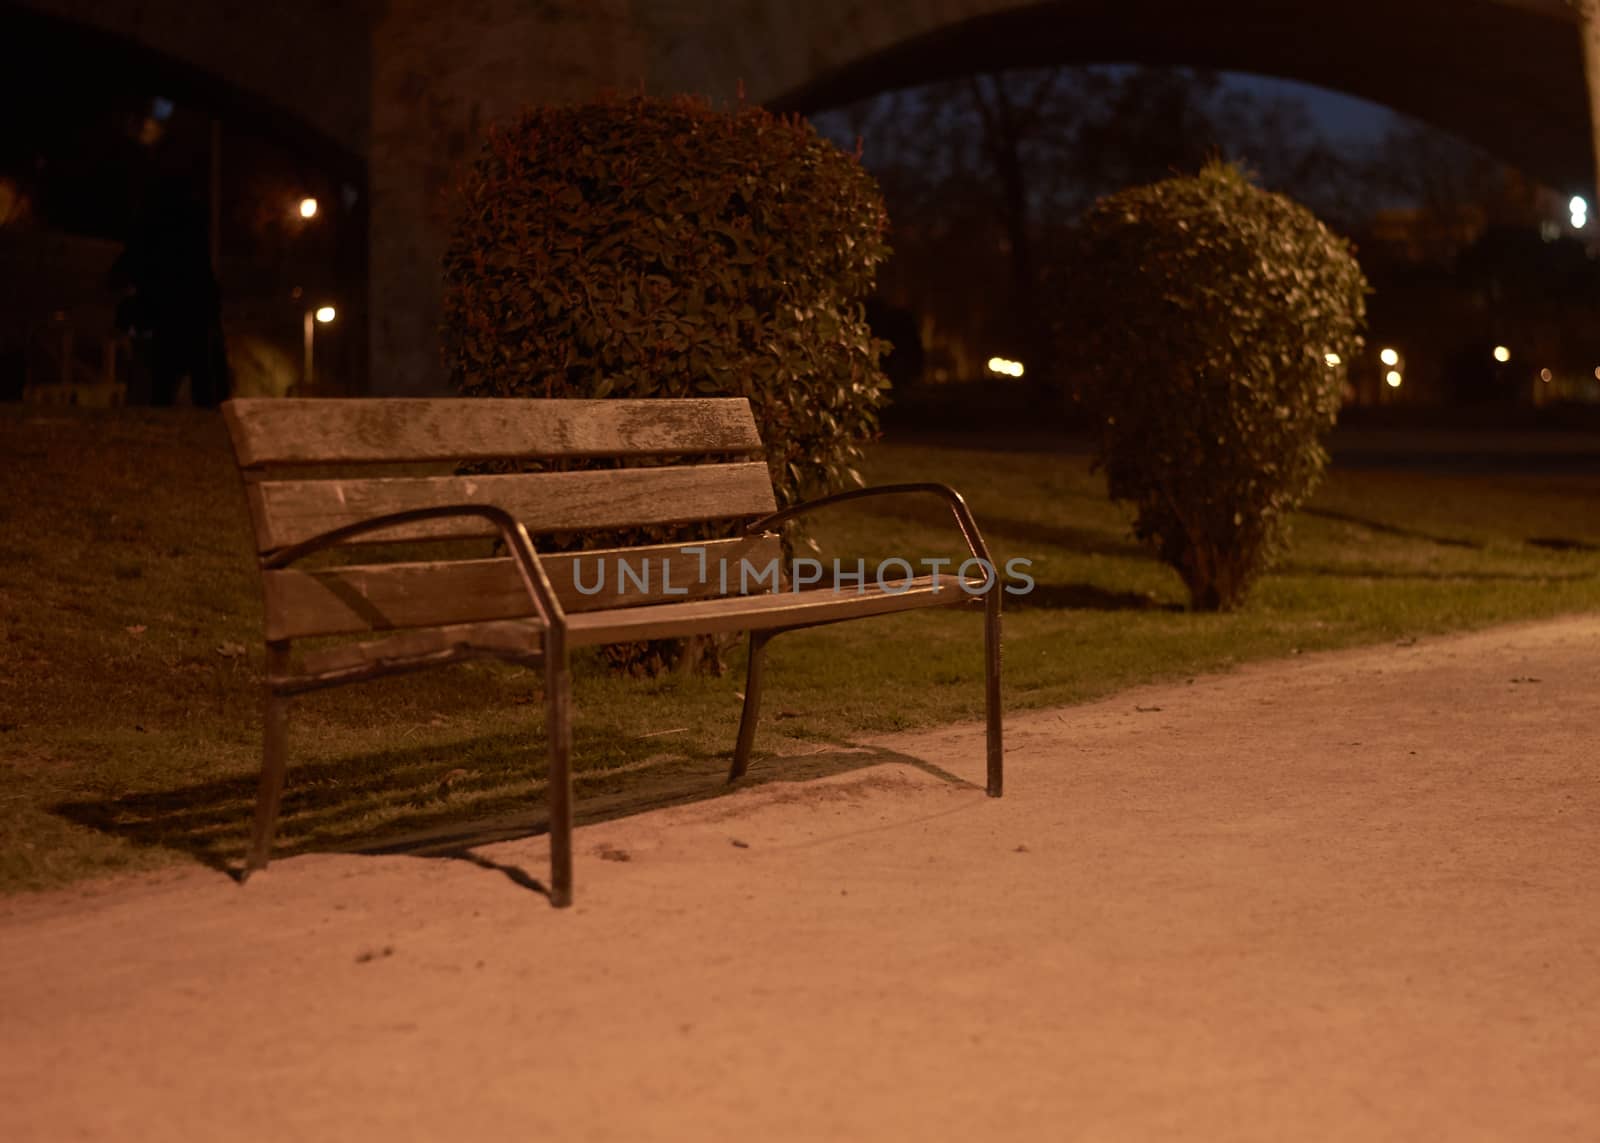 Lonely bench in the dark waiting for a friend by raul_ruiz